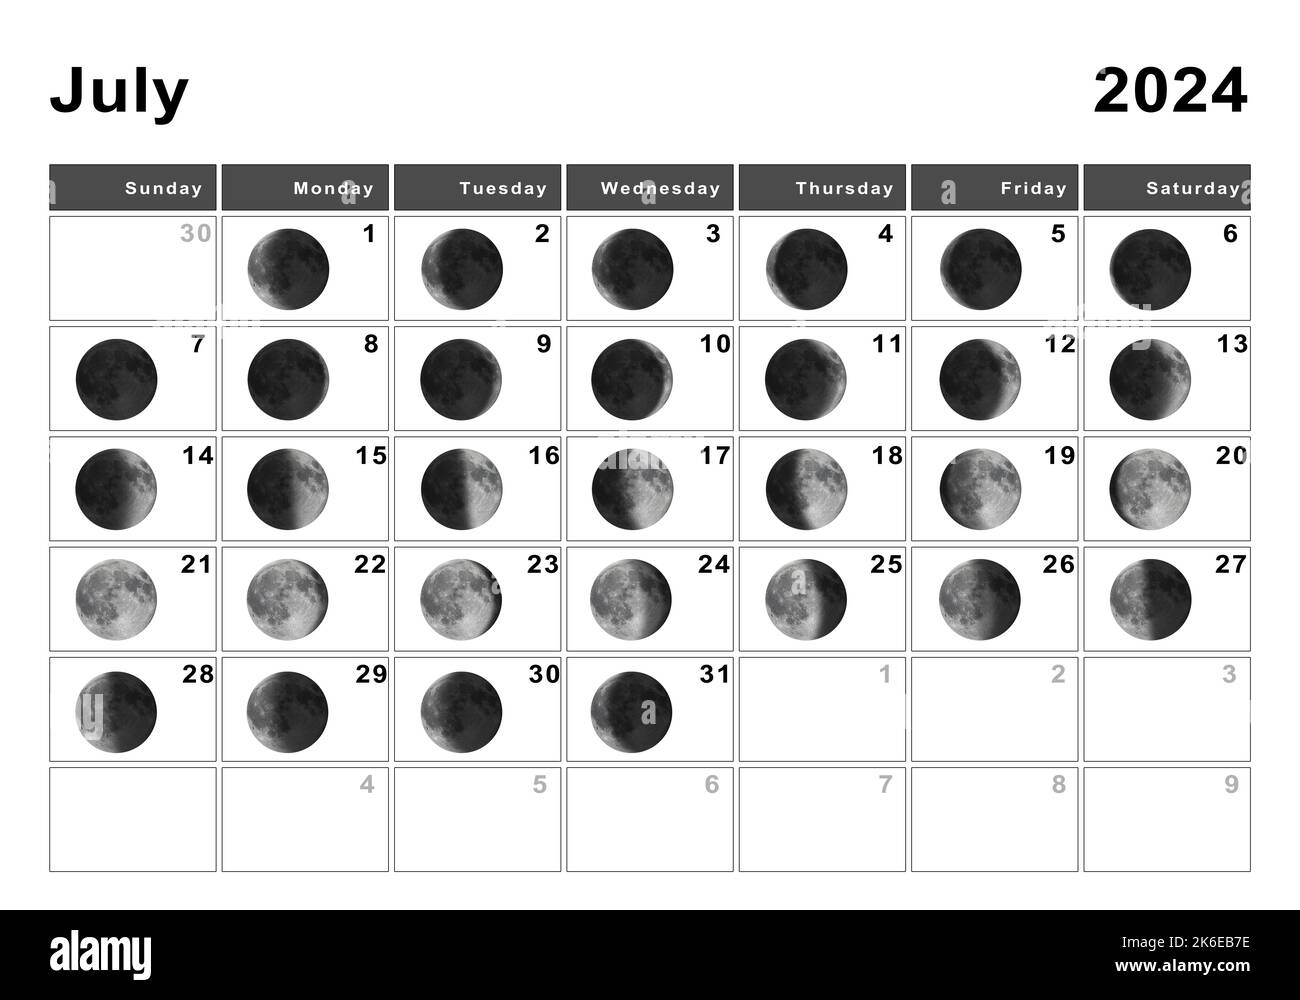 July 2024 Lunar Calendar, Moon Cycles, Moon Phases Stock Photo - Alamy | Moon Phase Calendar For July 2024